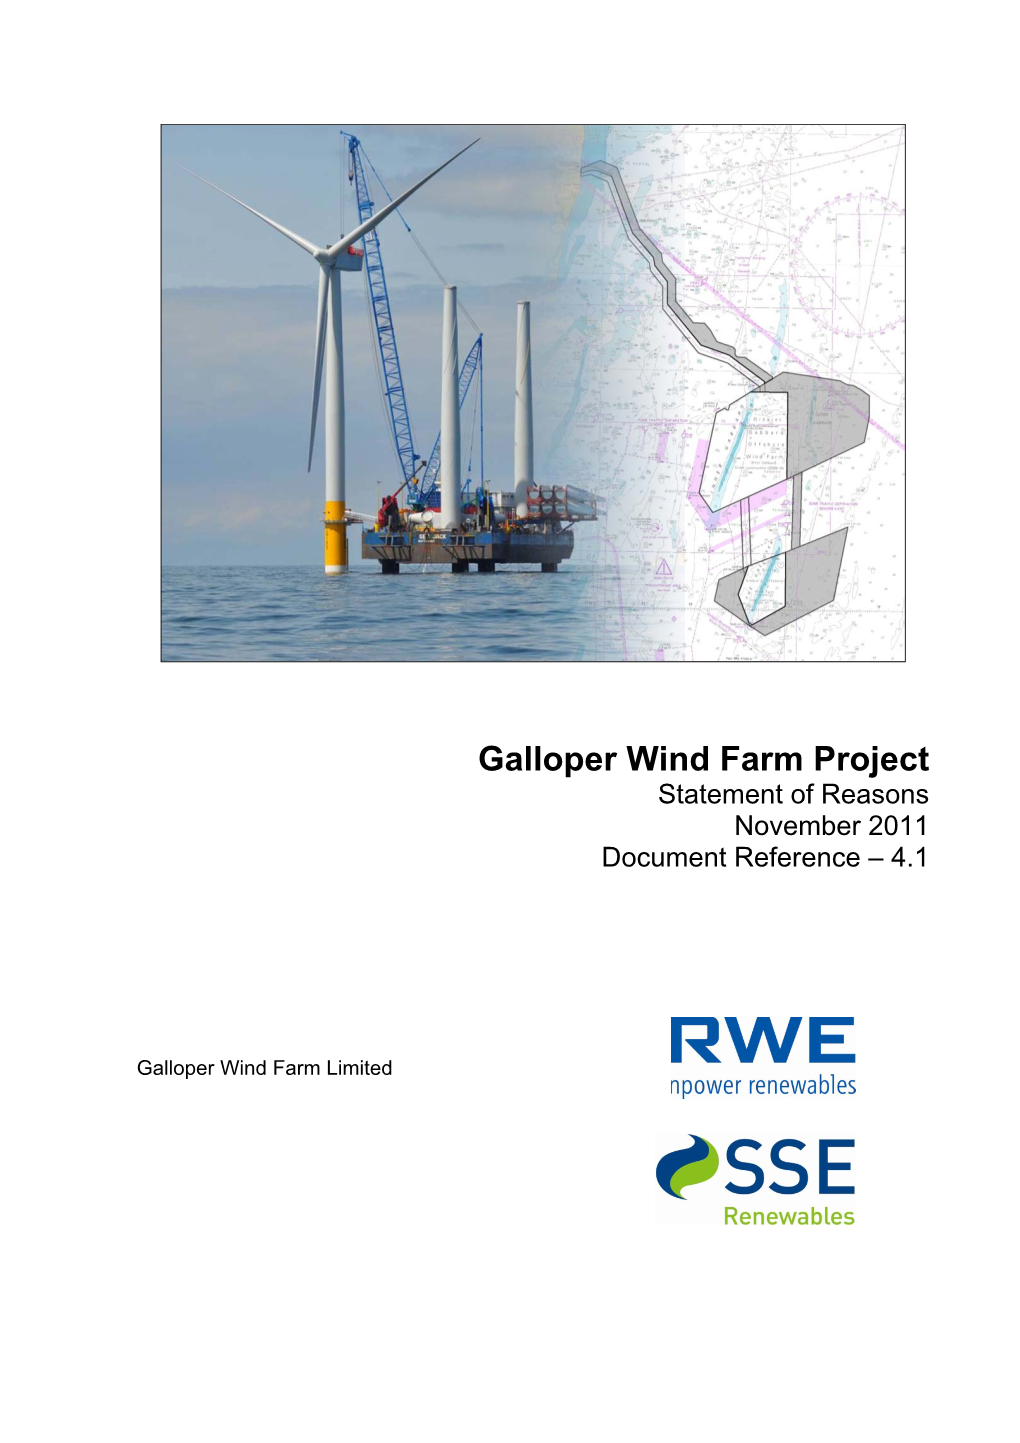 Galloper Wind Farm Project Statement of Reasons November 2011 Document Reference – 4.1